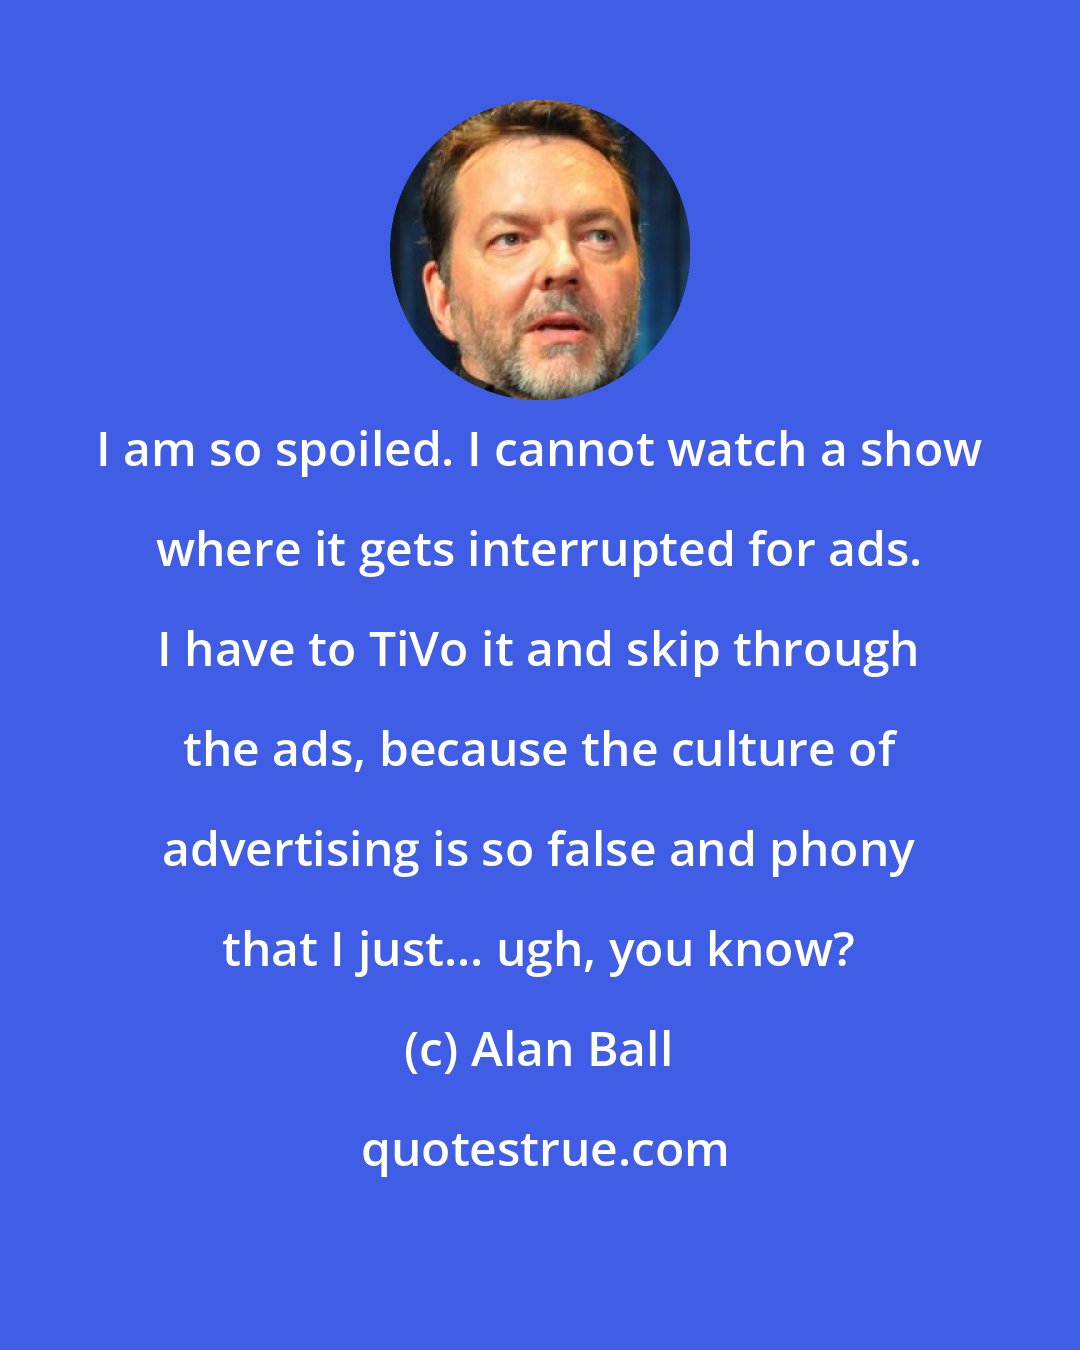 Alan Ball: I am so spoiled. I cannot watch a show where it gets interrupted for ads. I have to TiVo it and skip through the ads, because the culture of advertising is so false and phony that I just... ugh, you know?